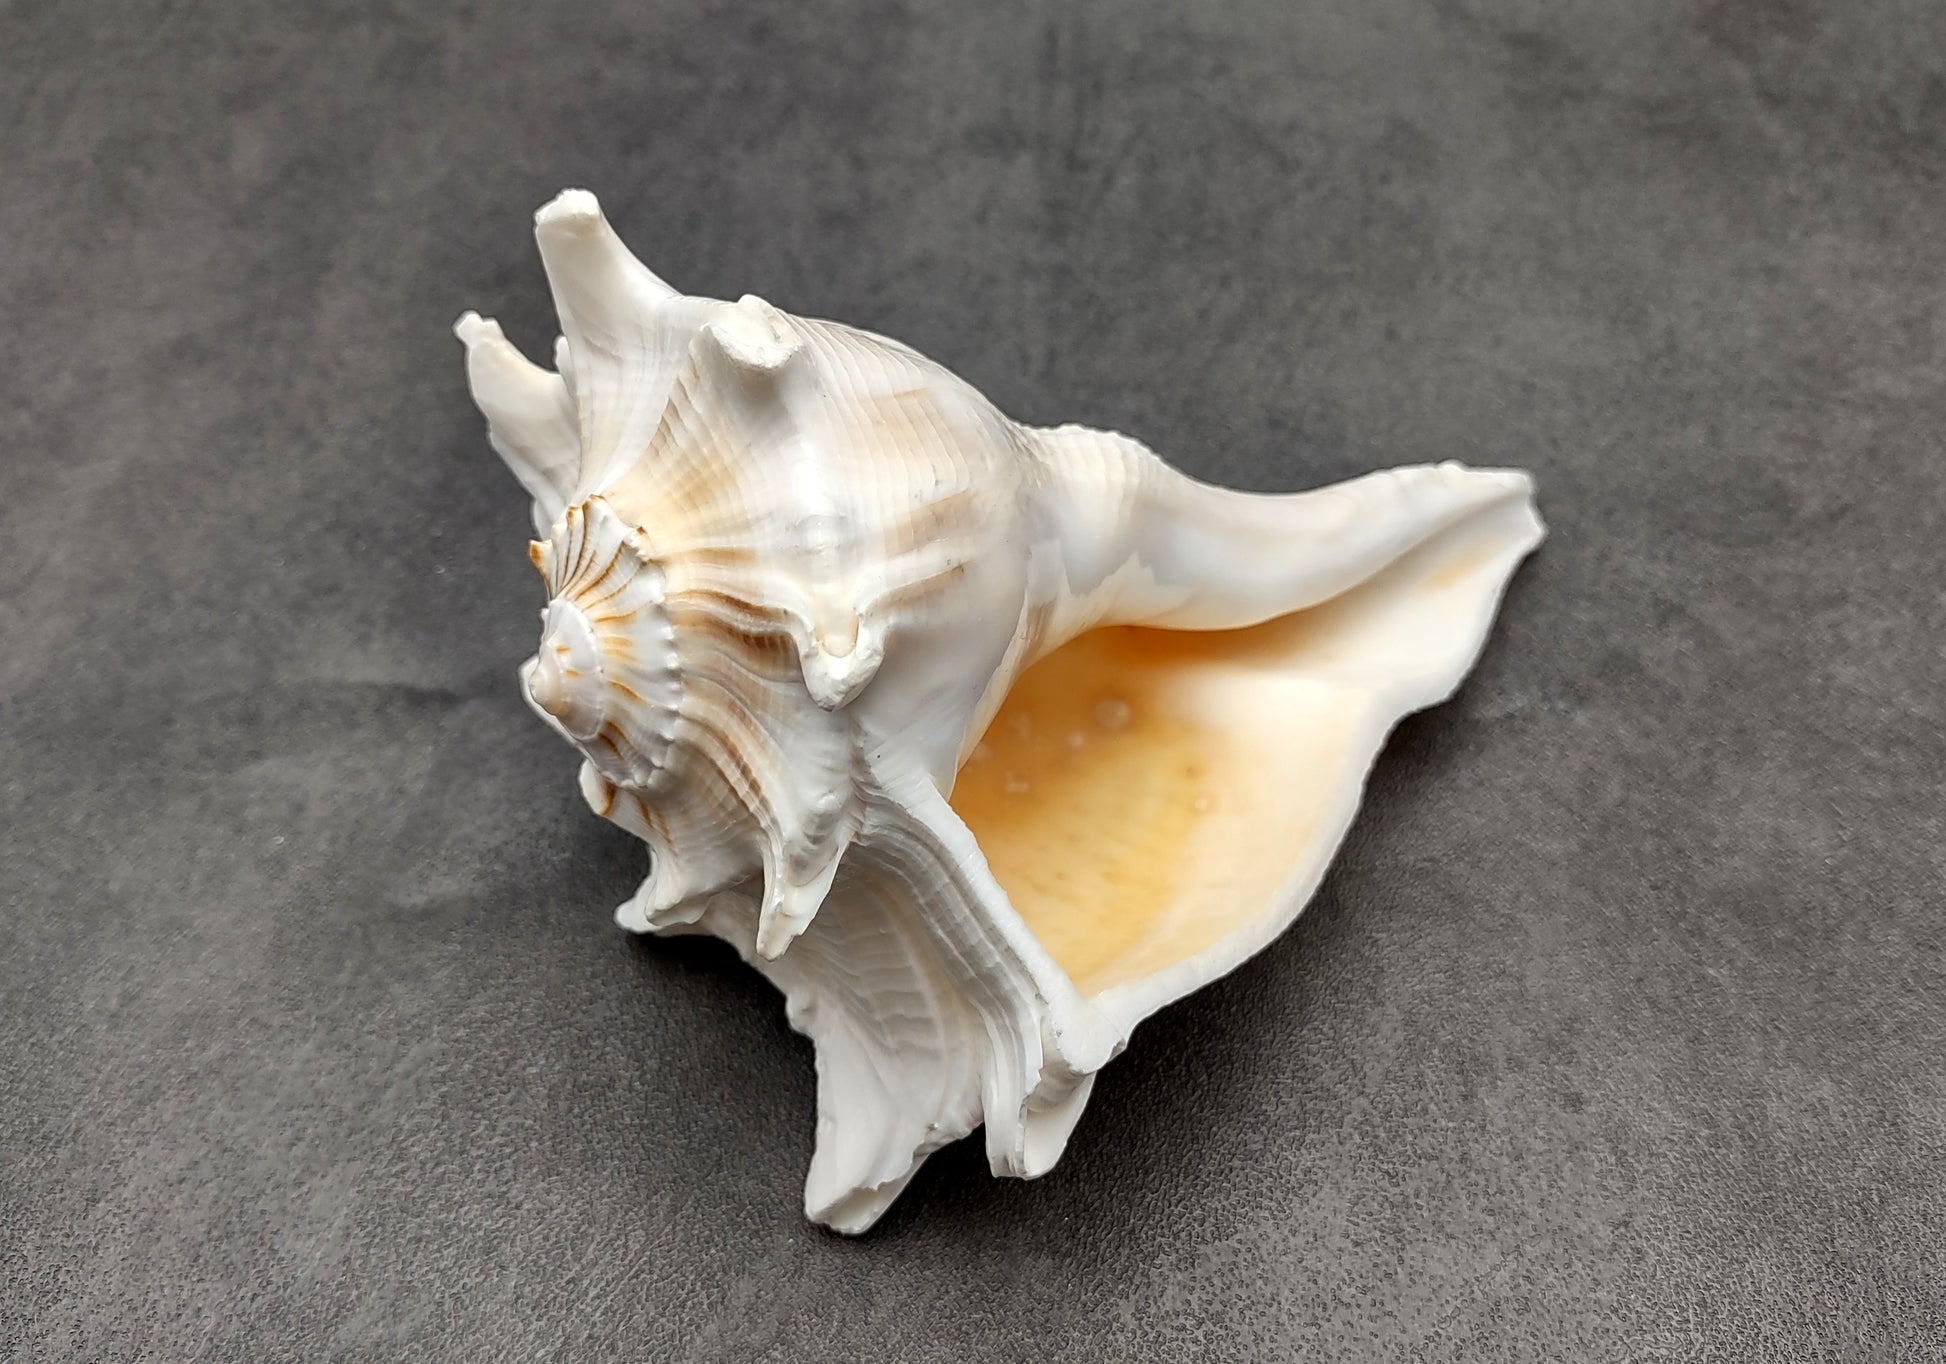 Lightning Whelk - Busycon Contrarium - (1 shell approx. 6-7 inches). One grey and white spiral shell with medium sized opening. Copyright 2022 SeaShellSupply.com.